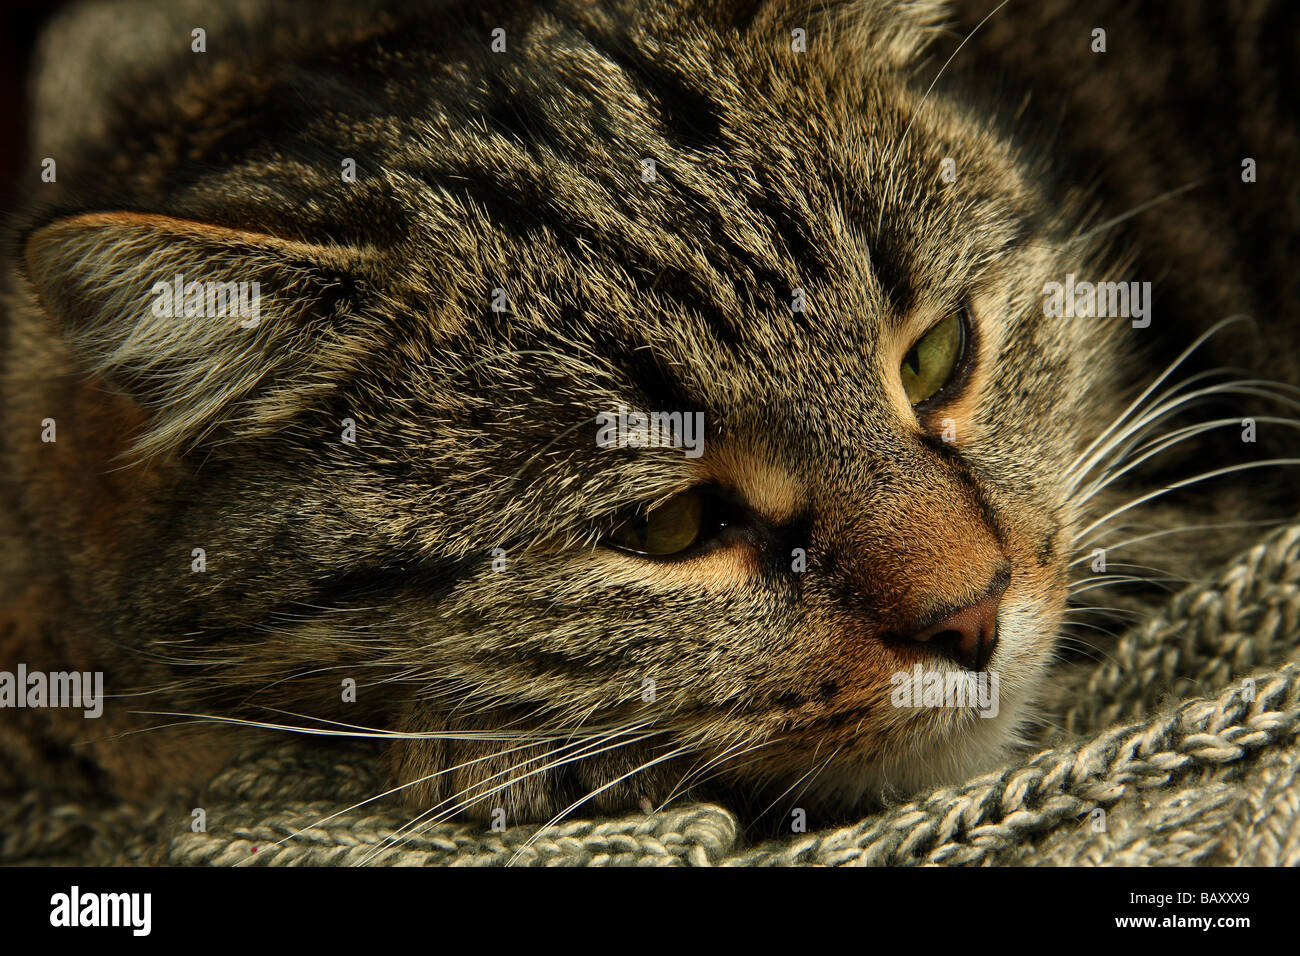 close up of a young tabby cat with its head resting on a pullover eyes slightly open Stock Photo